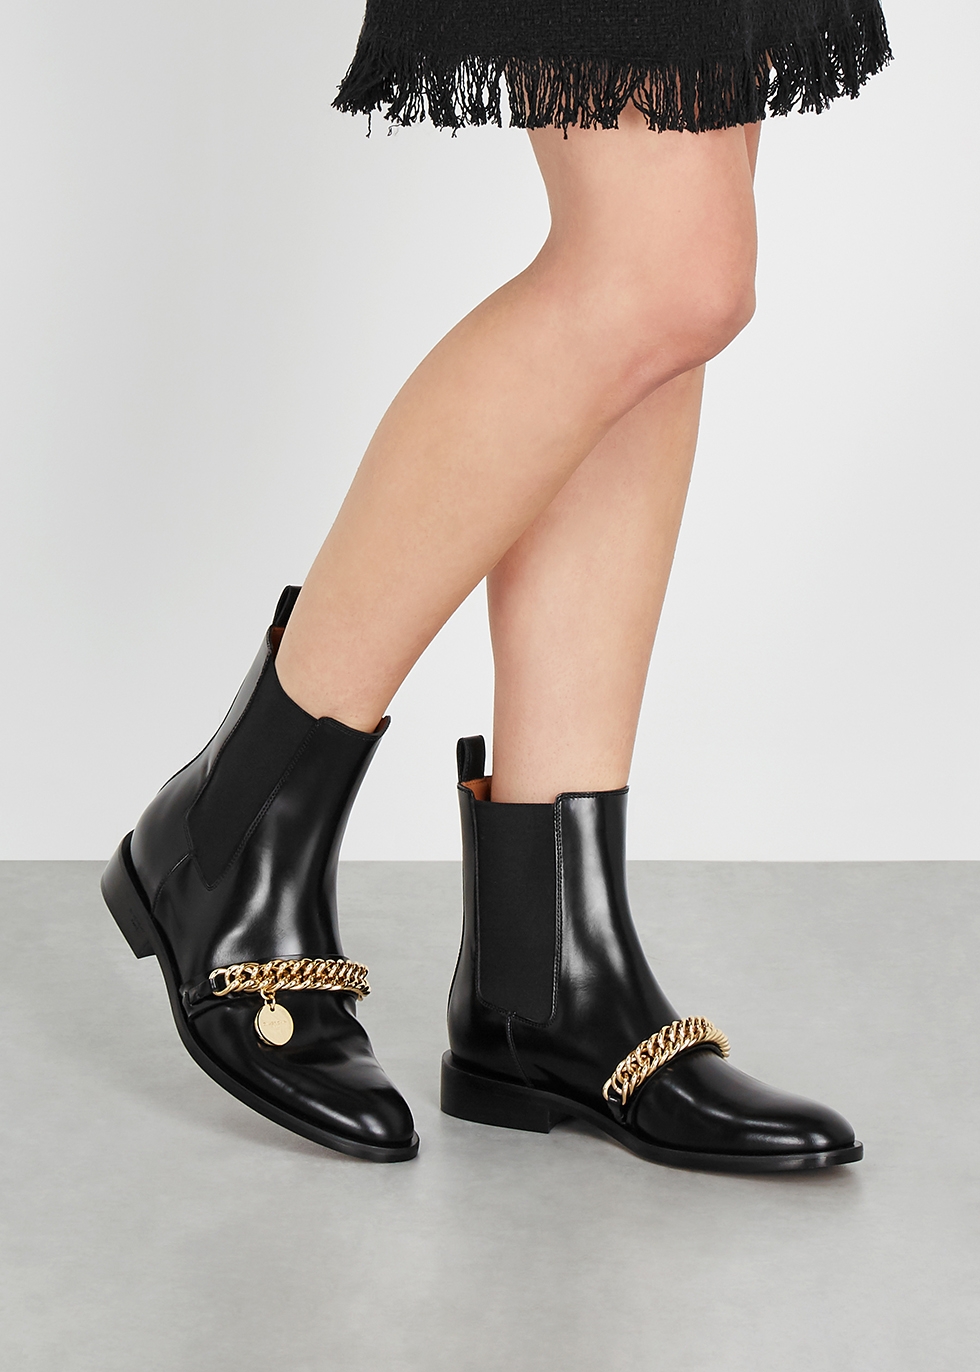 givenchy buckle boots sale